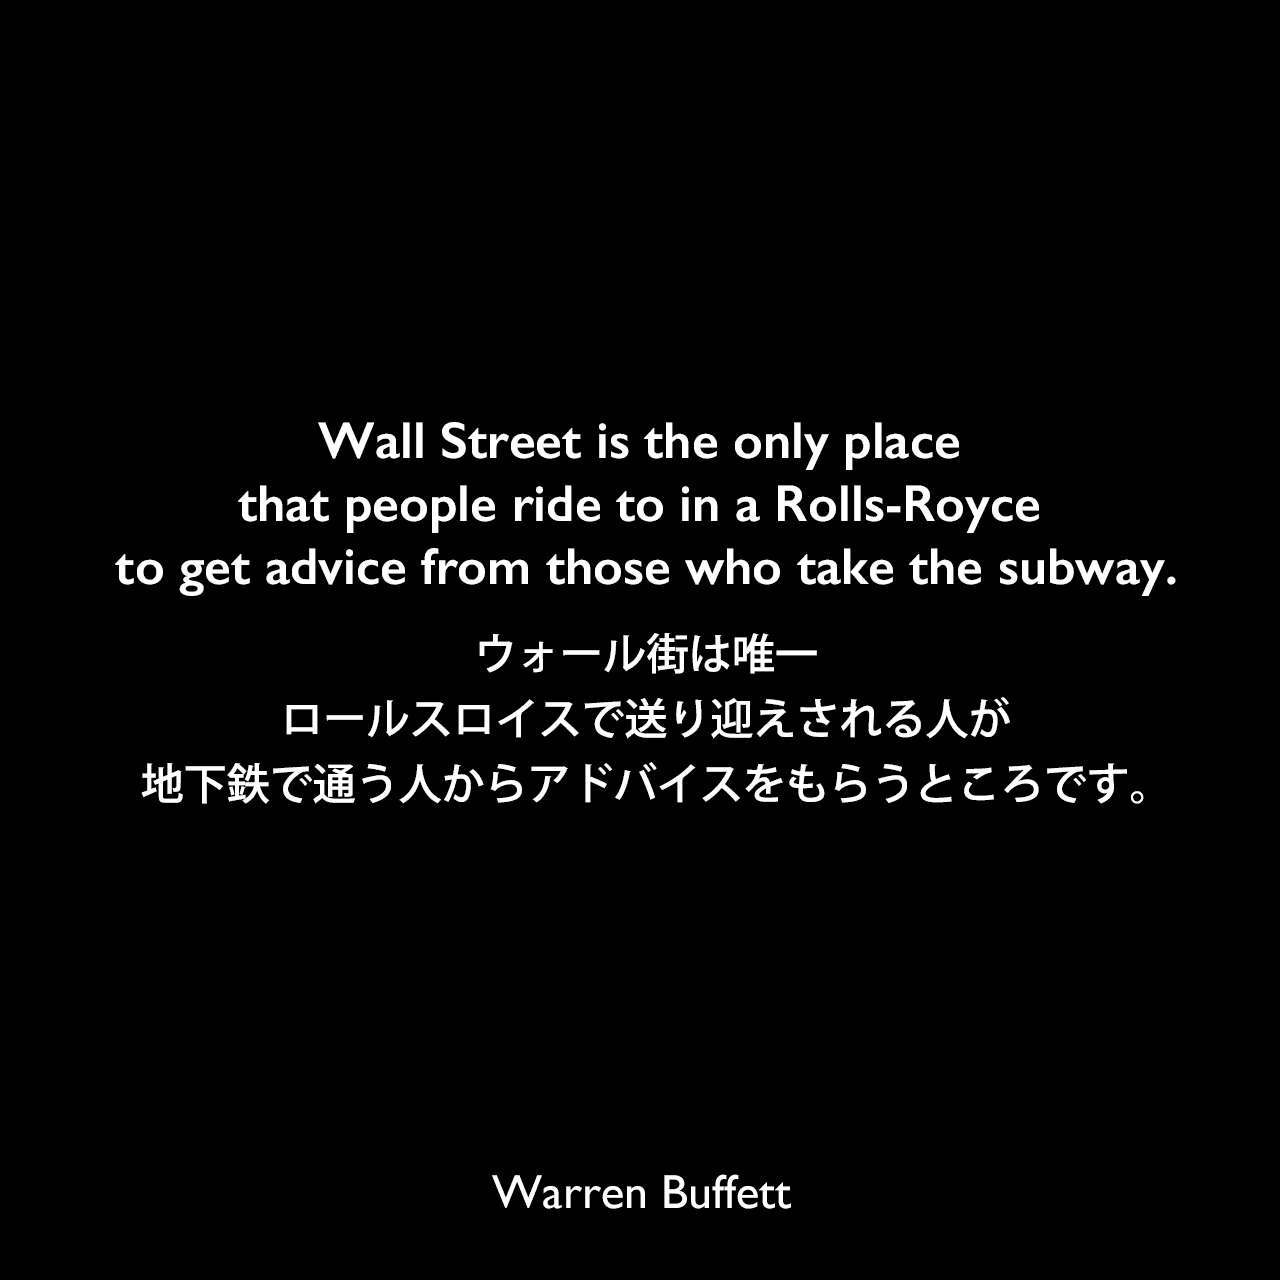 Wall Street is the only place that people ride to in a Rolls-Royce to get advice from those who take the subway.ウォール街は唯一、ロールスロイスで送り迎えされる人が地下鉄で通う人からアドバイスをもらうところです。Warren Buffett